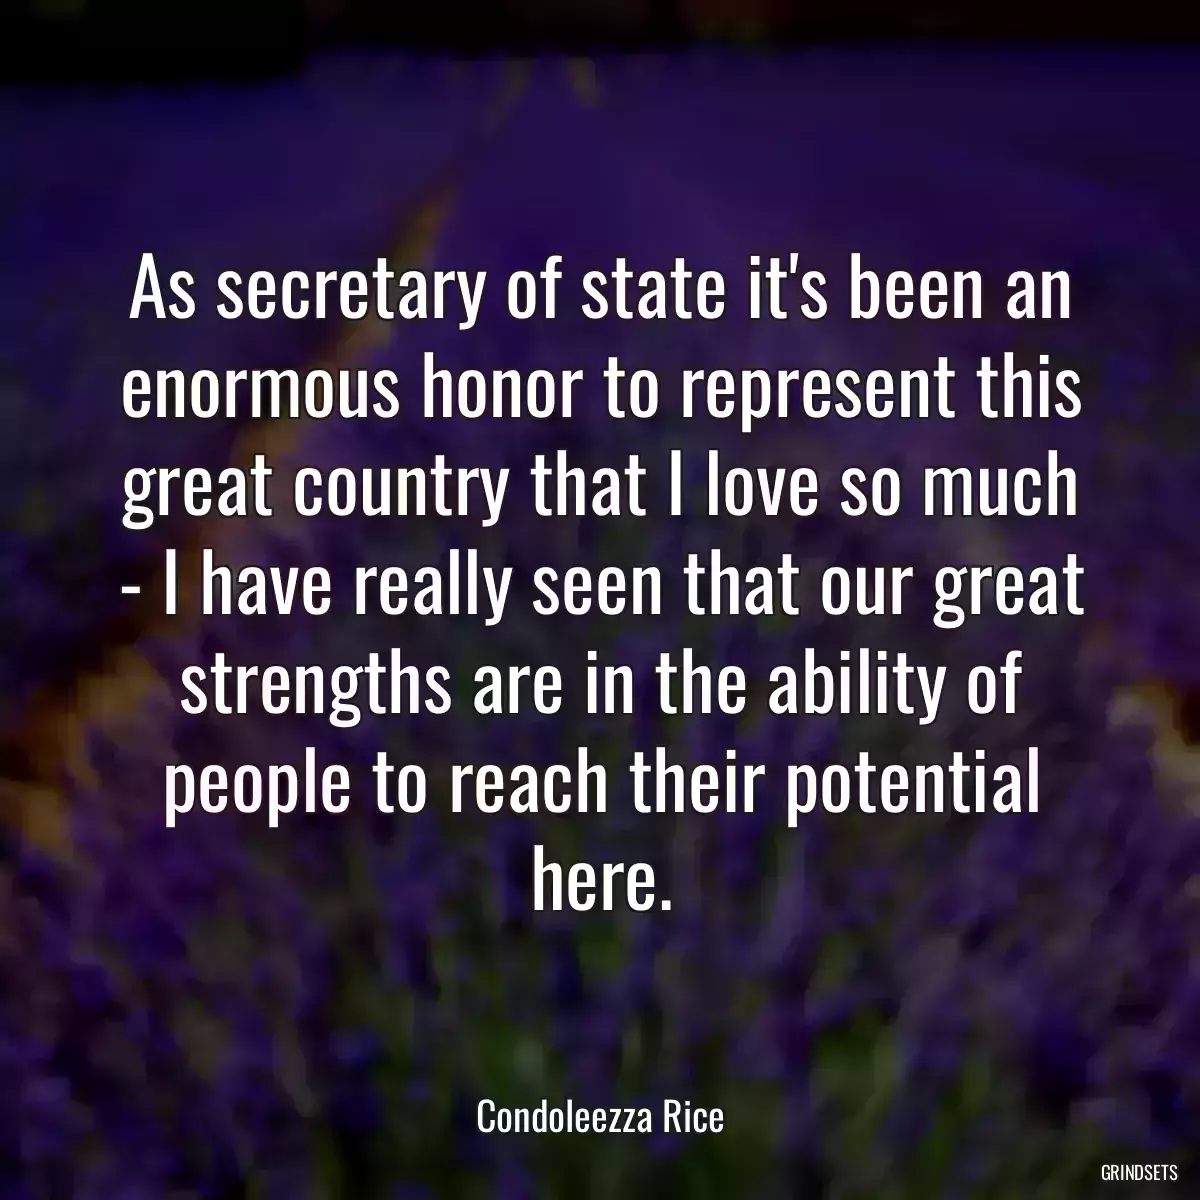 As secretary of state it\'s been an enormous honor to represent this great country that I love so much - I have really seen that our great strengths are in the ability of people to reach their potential here.